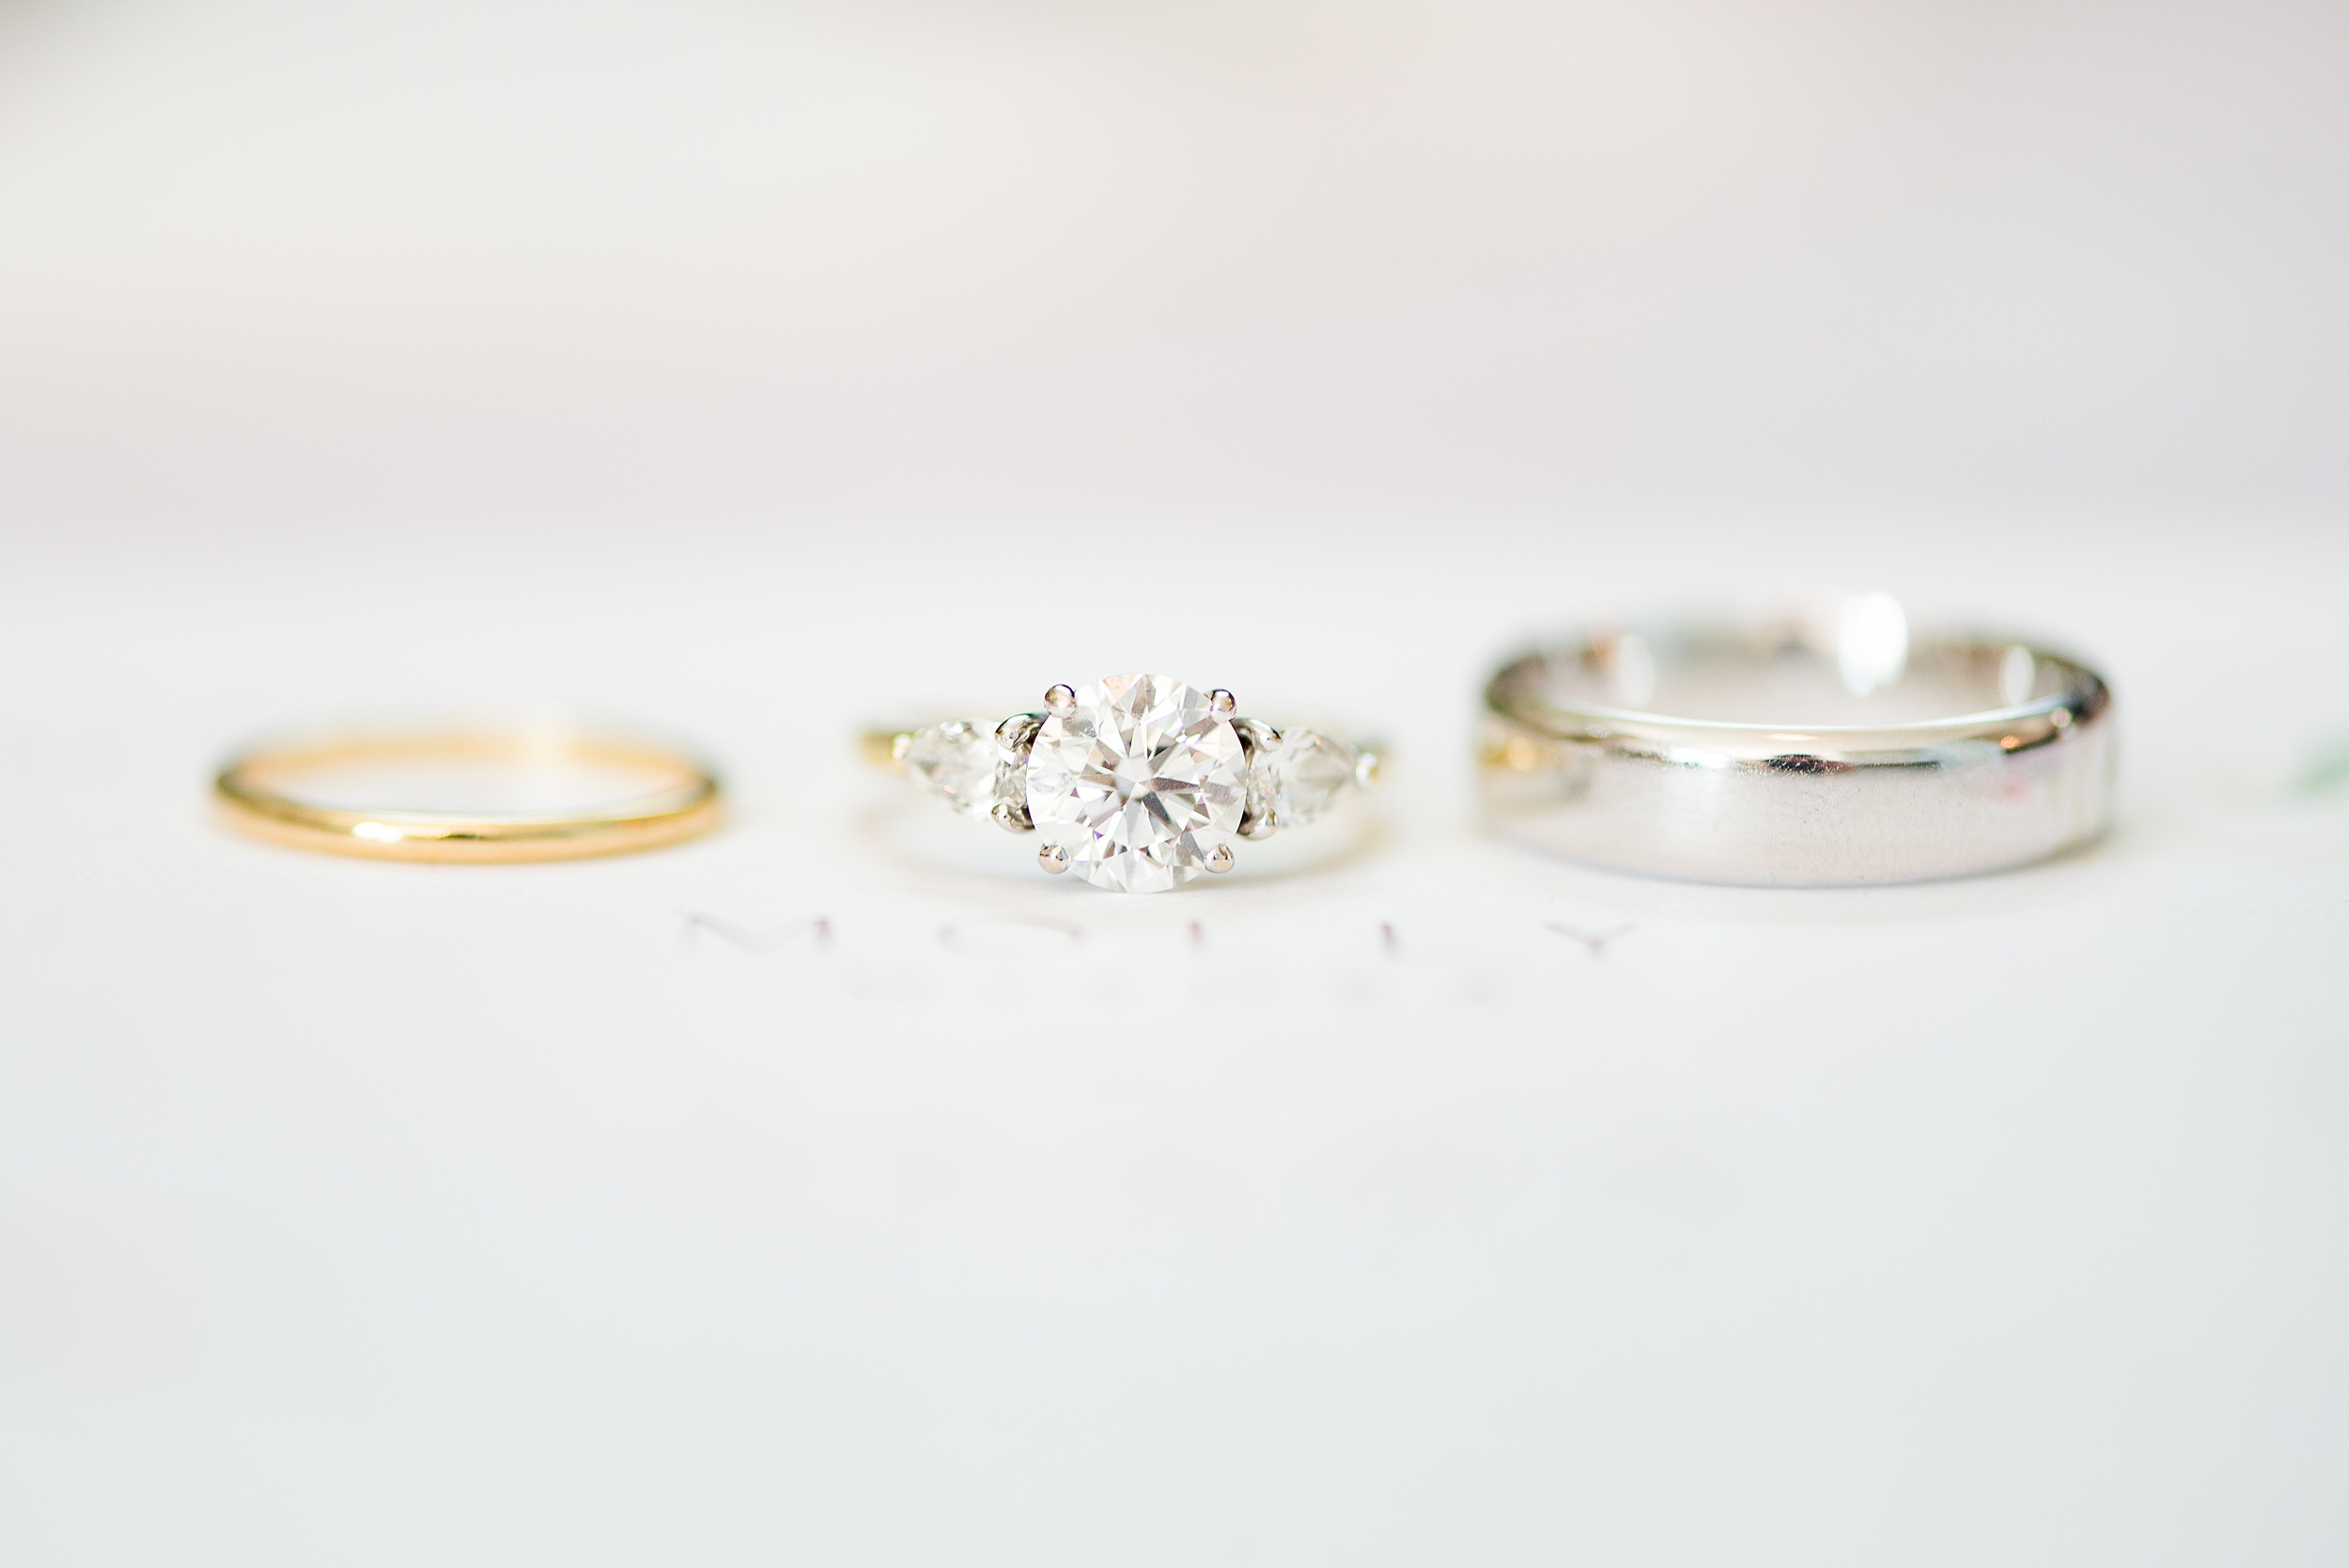 Details of wedding bands and engagement ring sitting on a table